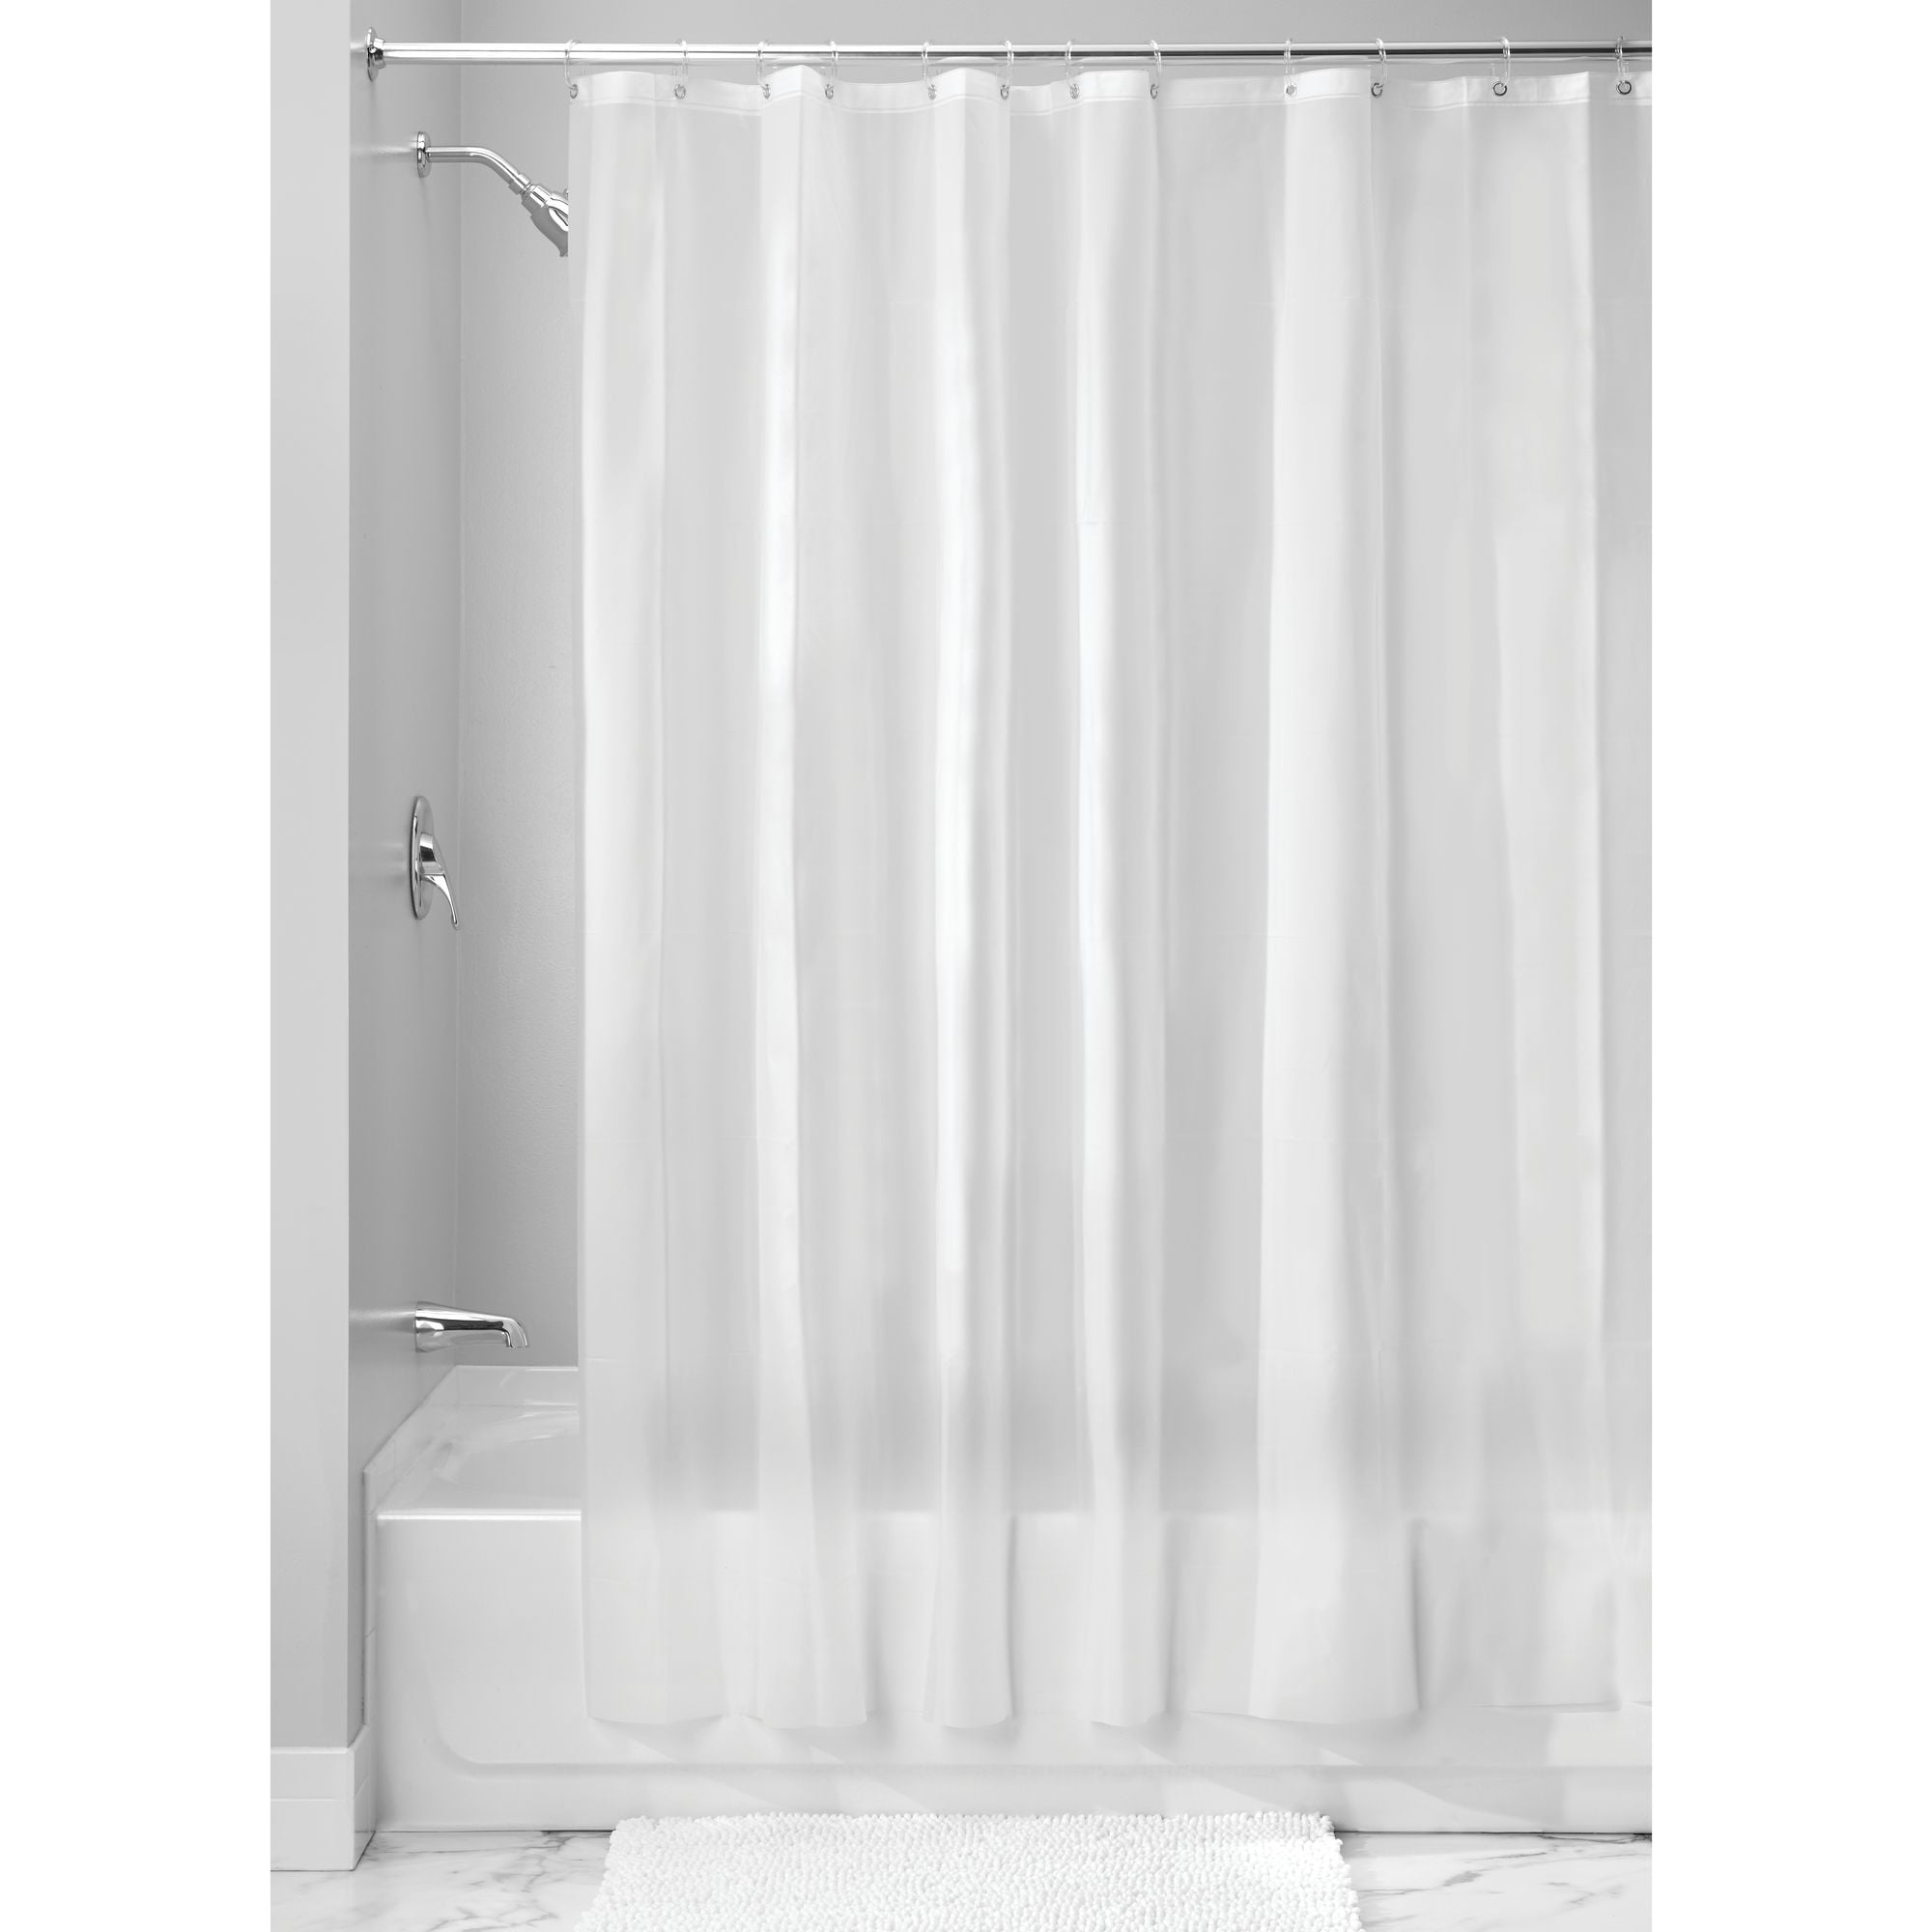 Idesign Eva 5 Gauge Shower Curtain, Curved 78 To 84 Inch Shower Curtain Rod